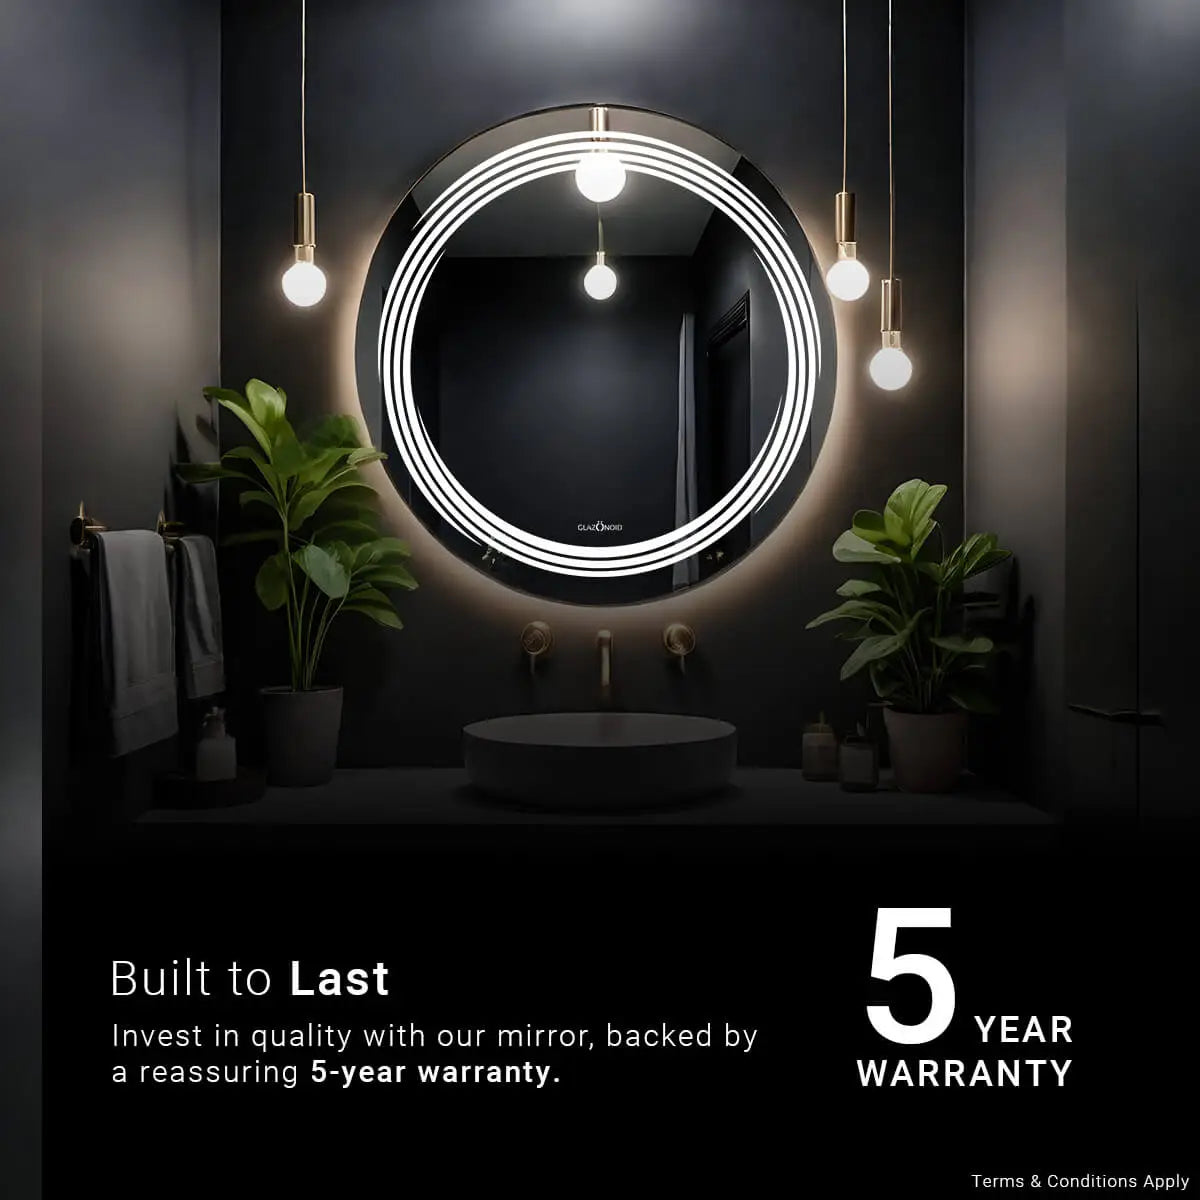 A close-up of a wall-mounted bathroom mirror with a built-in LED light strip. The mirror frameless and has a classic design. Text overlay reads "Glazonoid 5 Year Warranty". Glazonoid, the manufacturer, provides a 5-year warranty for this product.